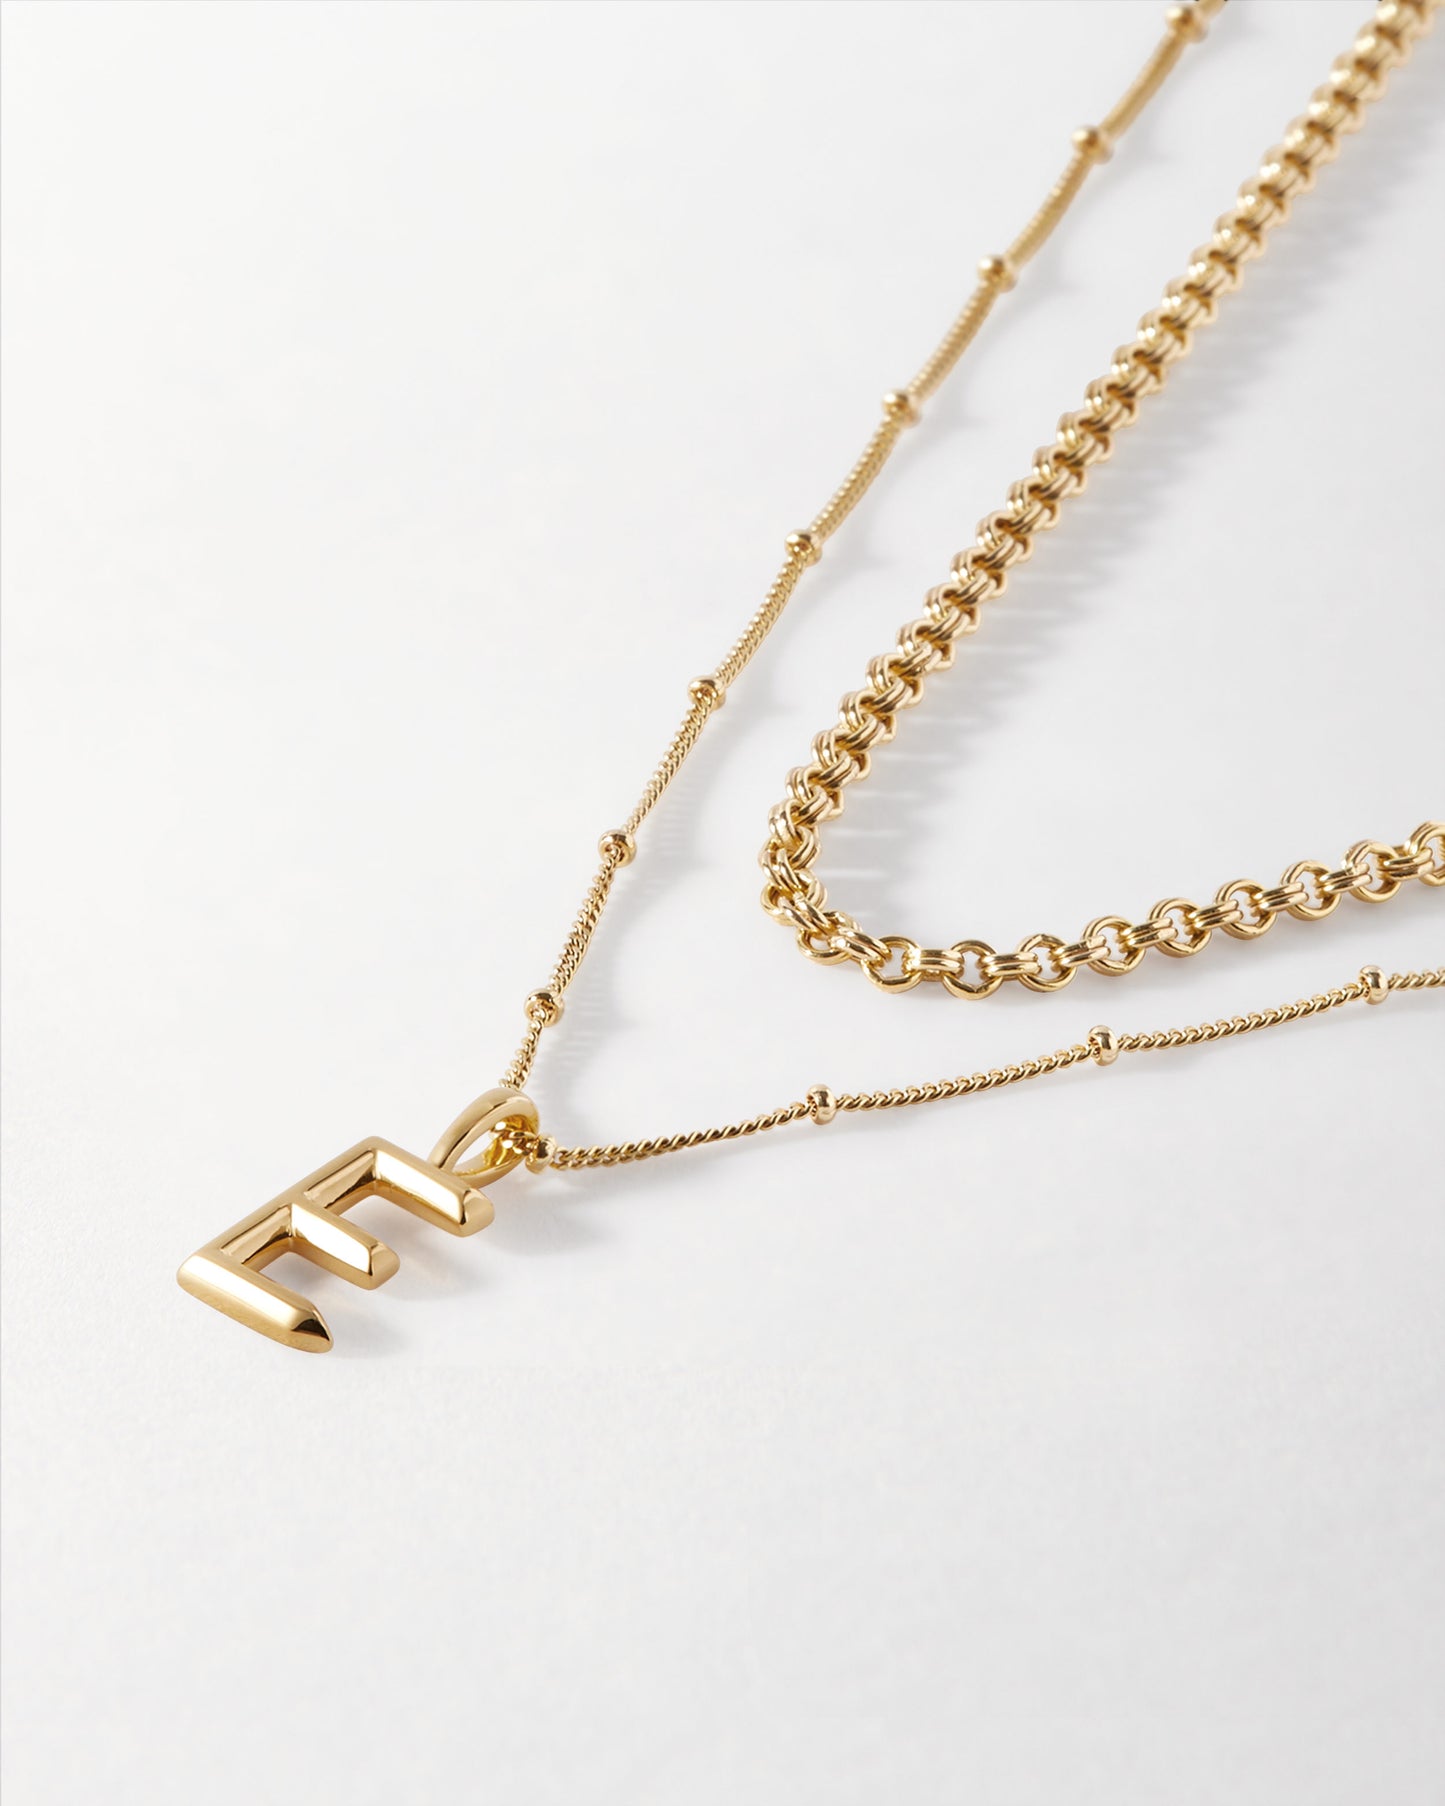 Initial Layering Necklace Set